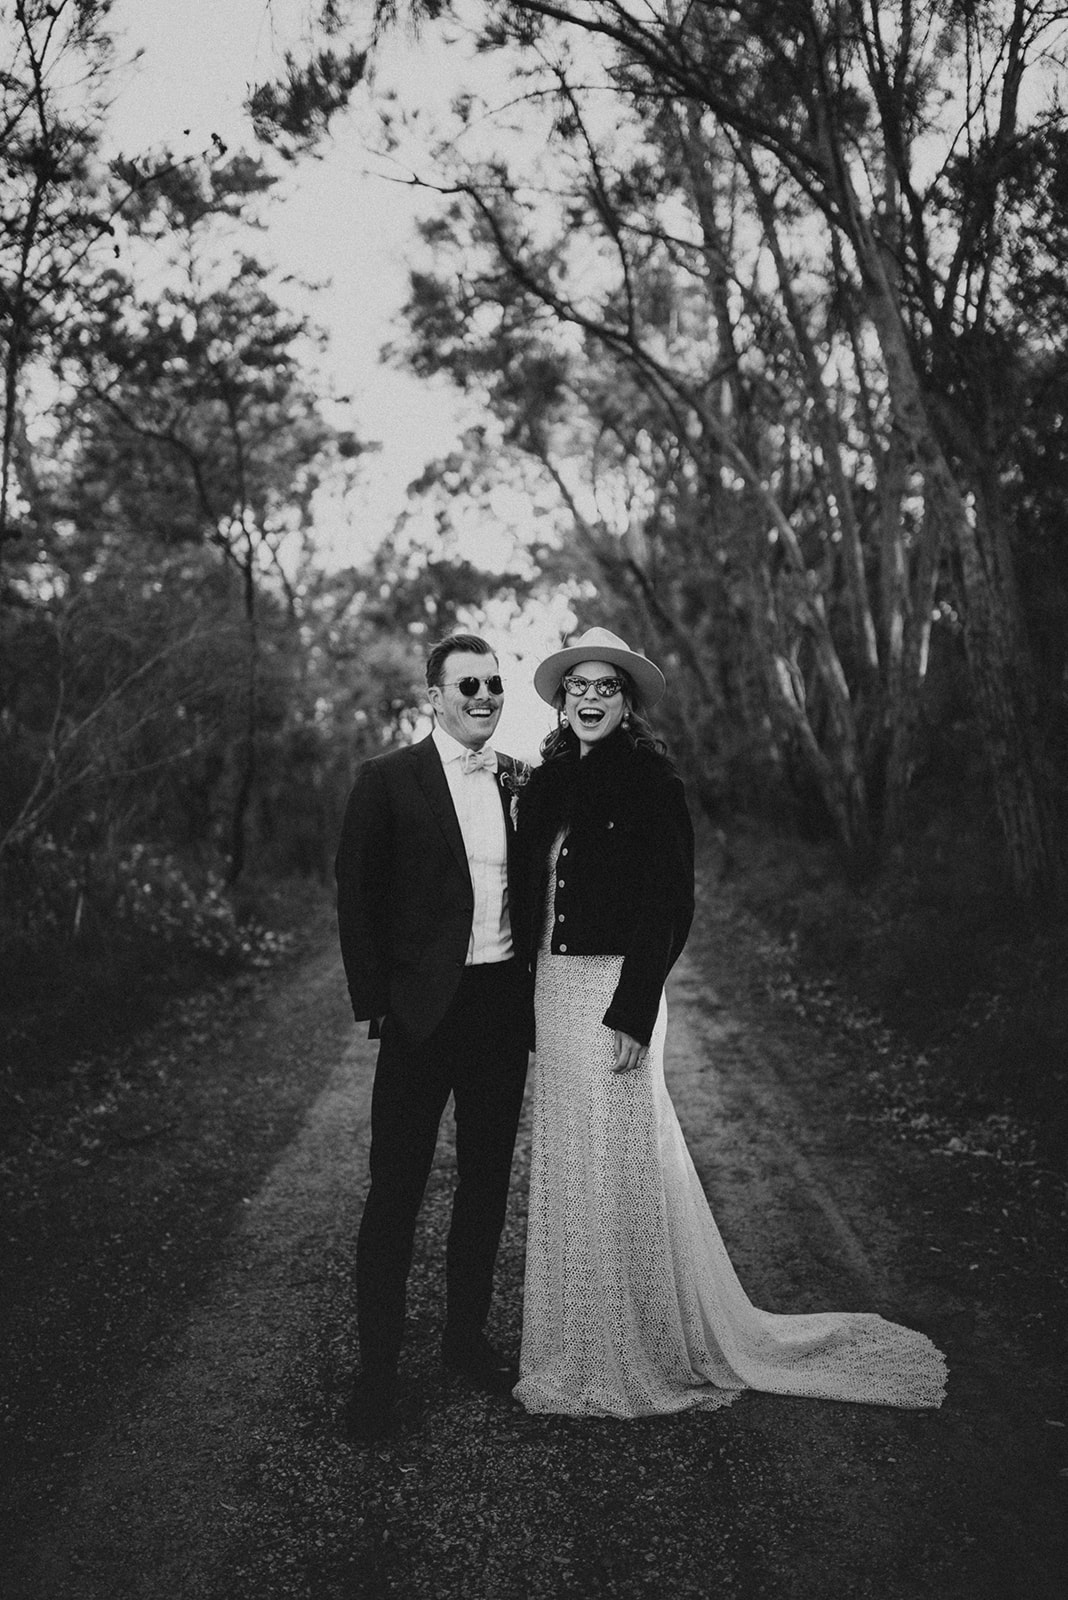 holly medway photography to the aisle australia country weddings floral design bridal gowns